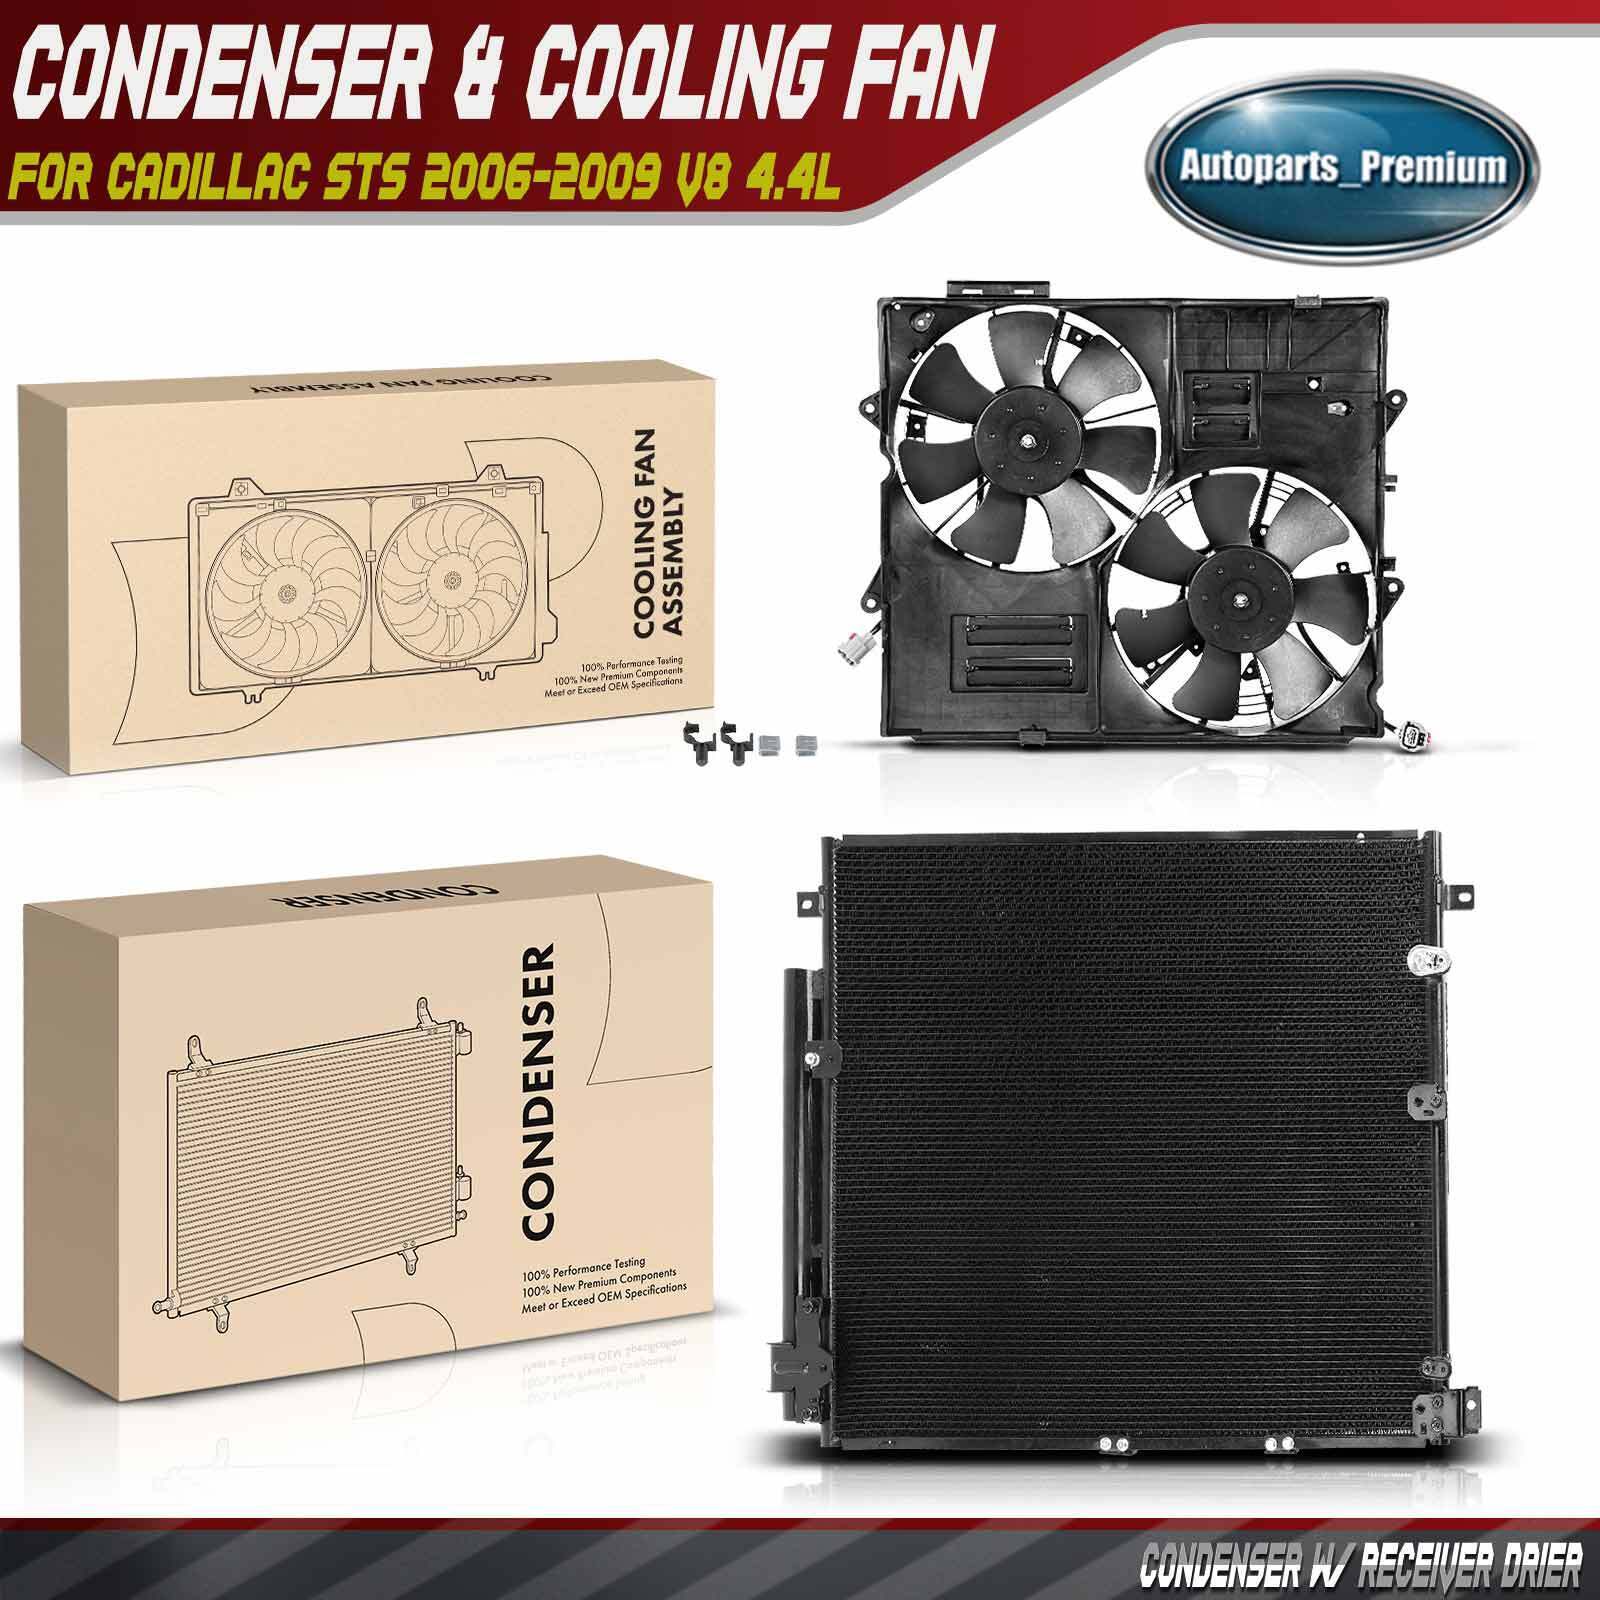 A/C Condenser & Dual Cooling Fan Assembly Kit for Cadillac STS 2006-2009 V8 4.4L